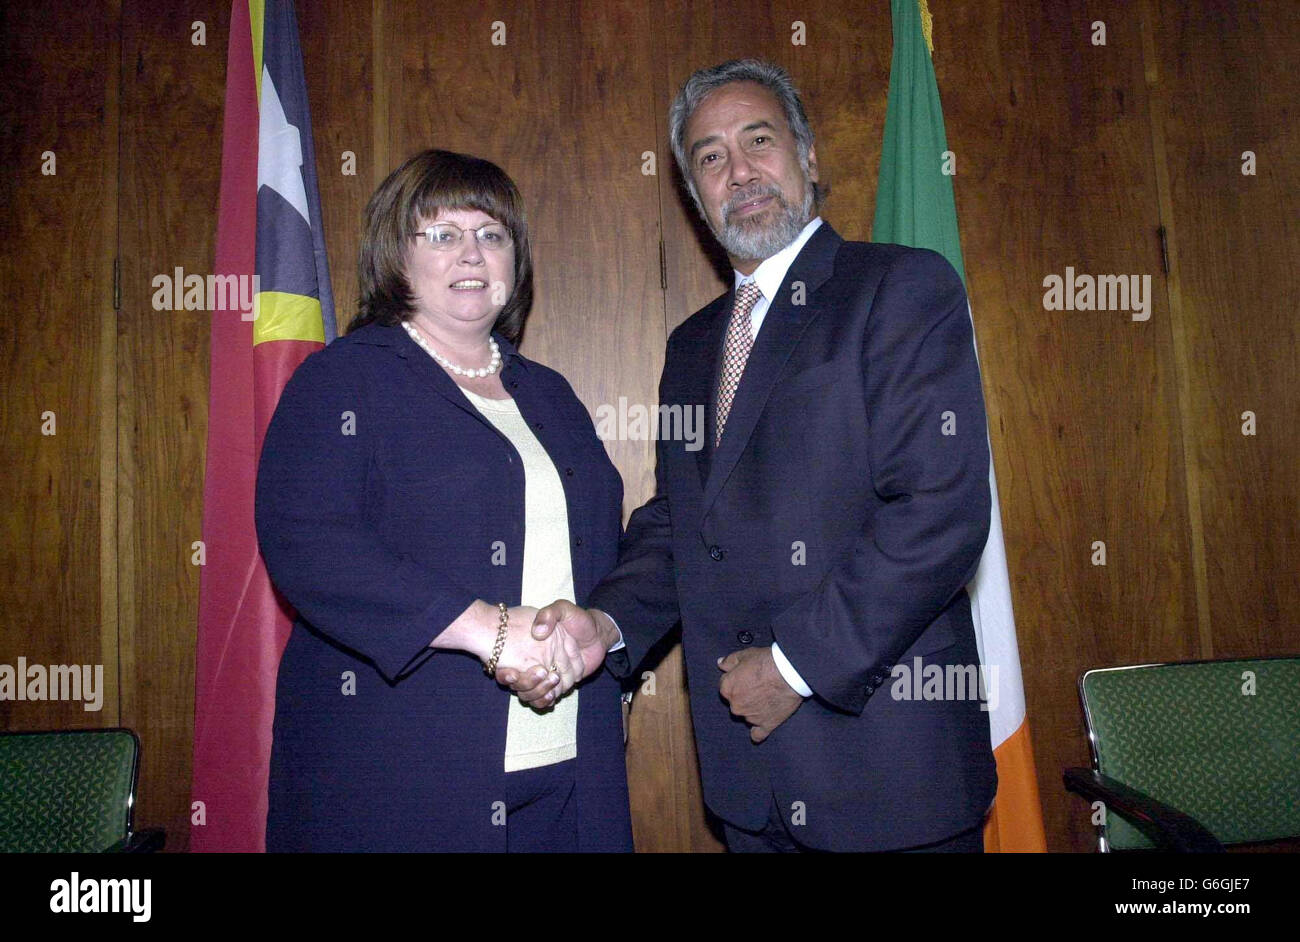 President of East Timor, Xanana Gusmao is greeted by Deputy Prime Minister of Ireland, Mary Harney, at the Ministry of Enterprise, Trade and Employment offices, Dublin, Ireland, during his visit to the Republic of Ireland and Northern Ireland. Stock Photo